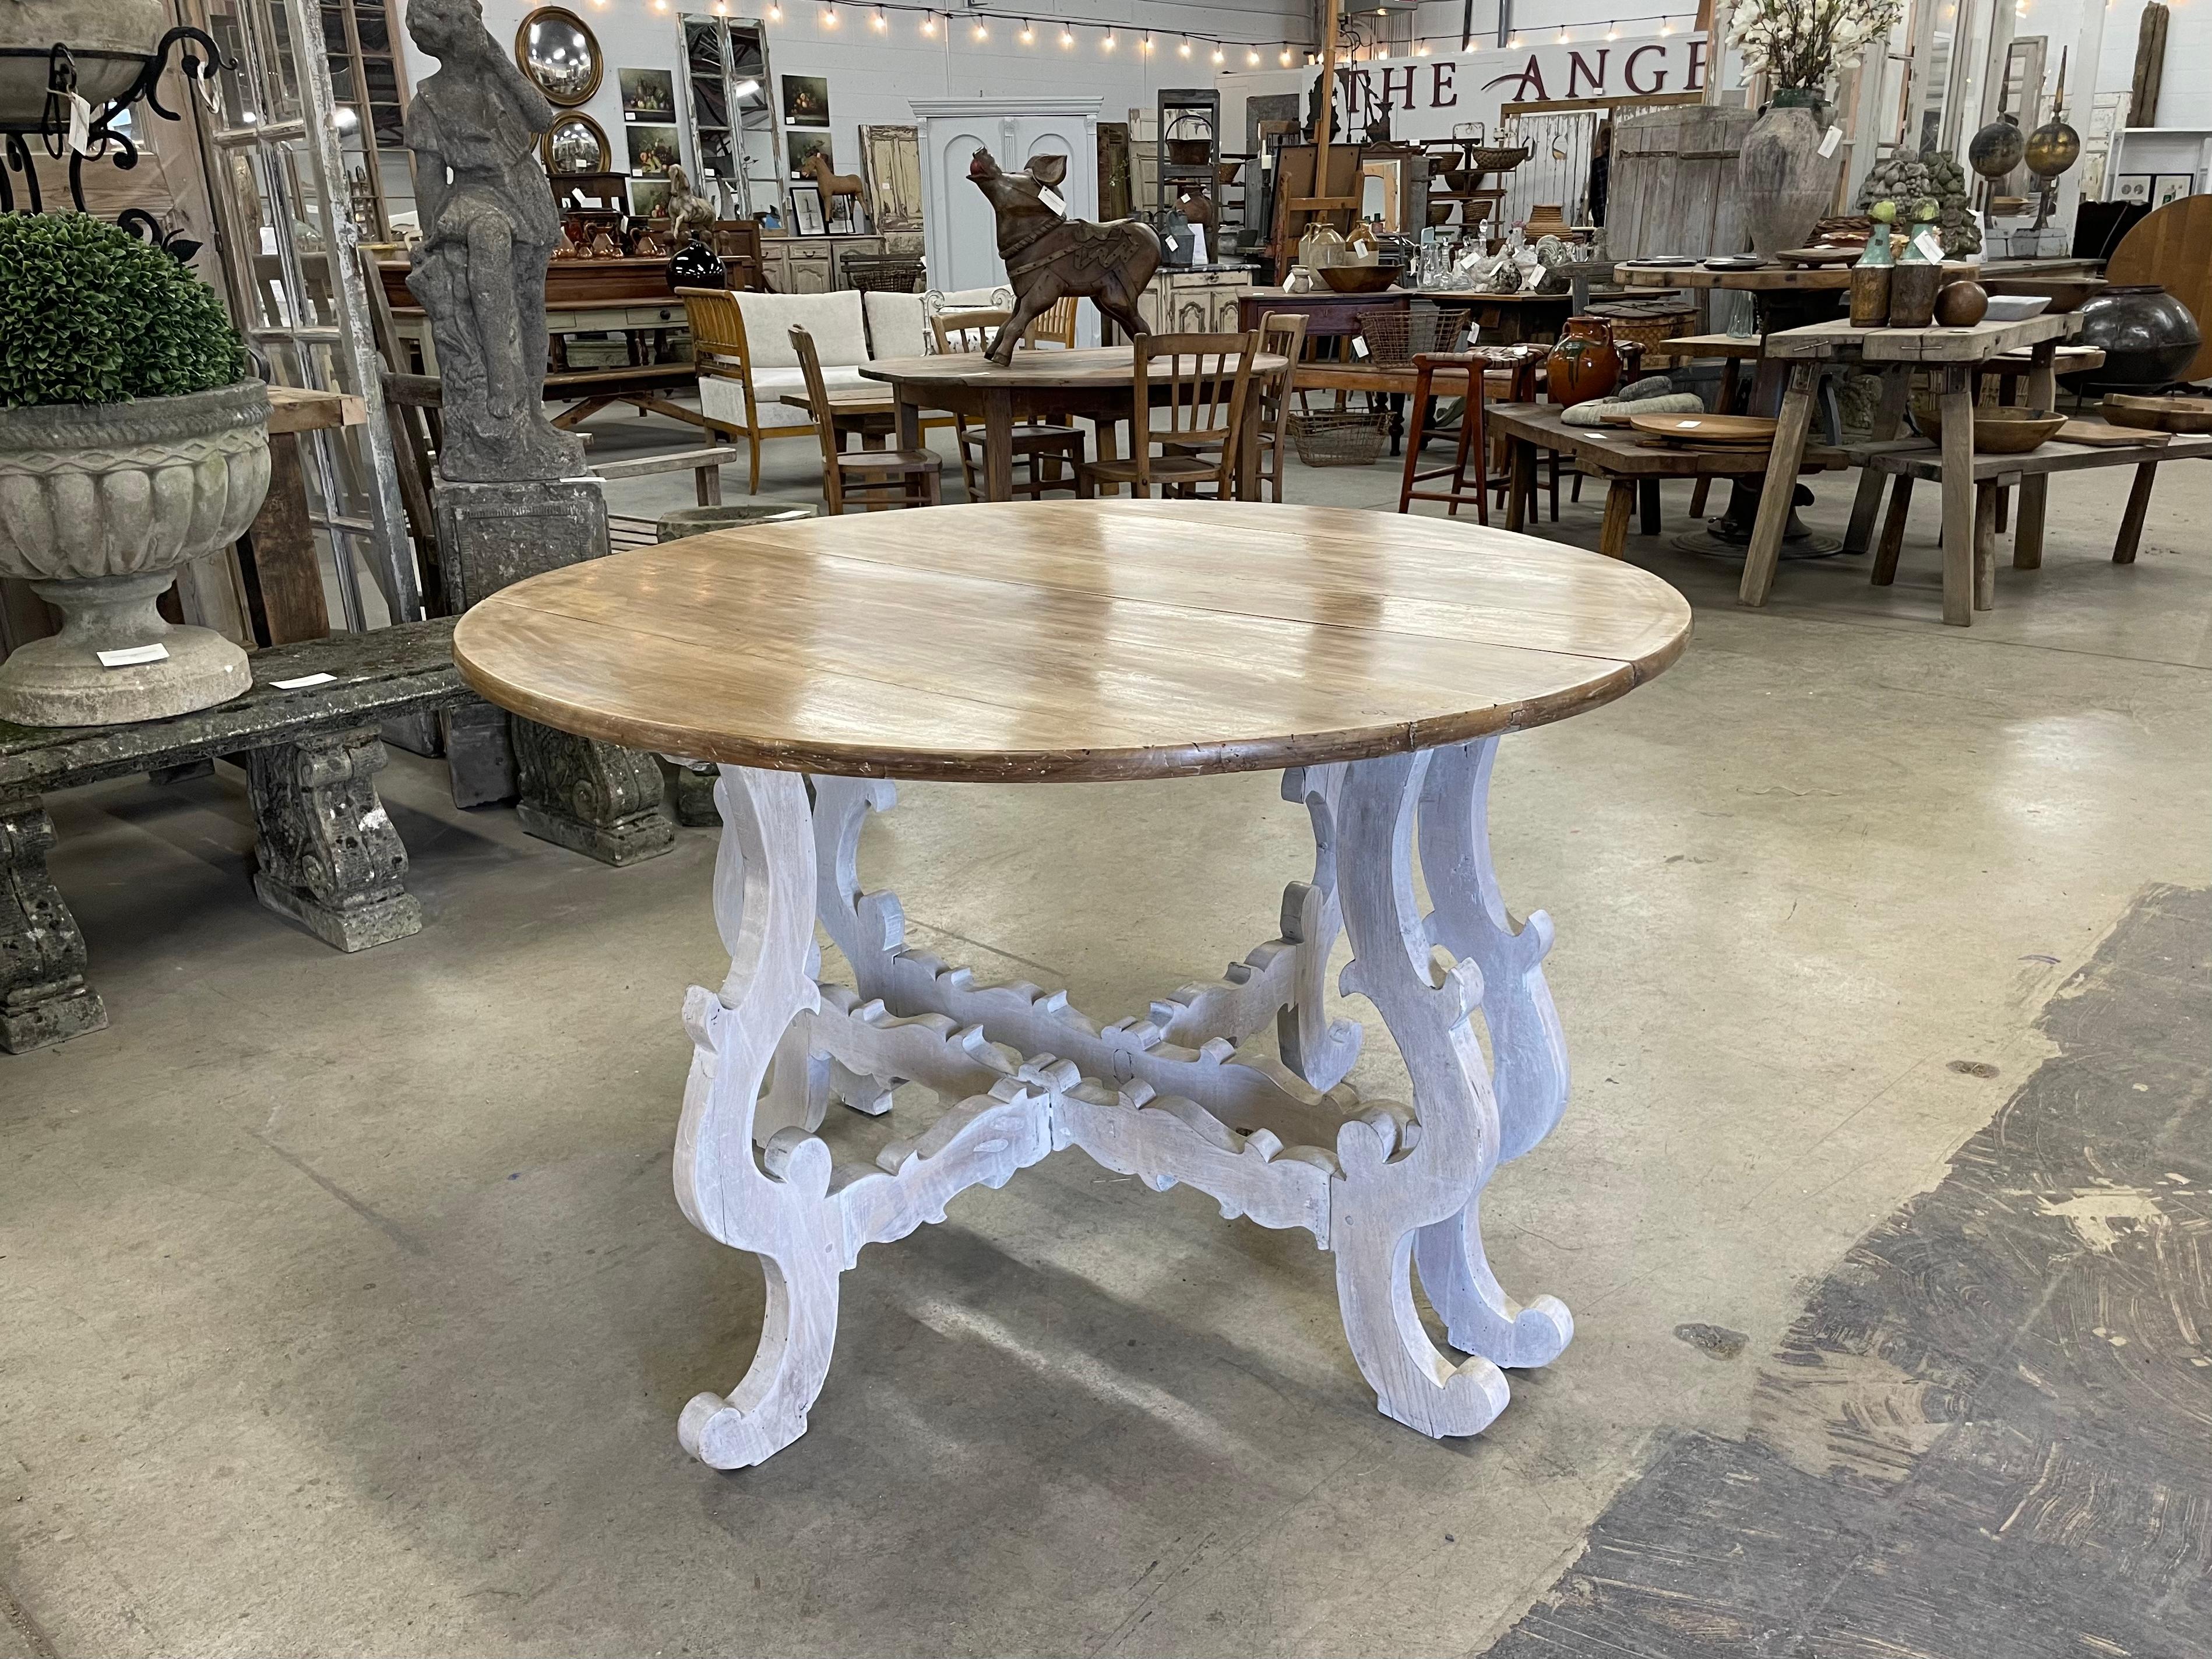 A pair of 19th century substantial Spanish Baroque style walnut console tables of exceptional quality. They can be stand alone demi-lune consoles or latched together to make a beautiful round table. The demi-lune tops are supported by decorative